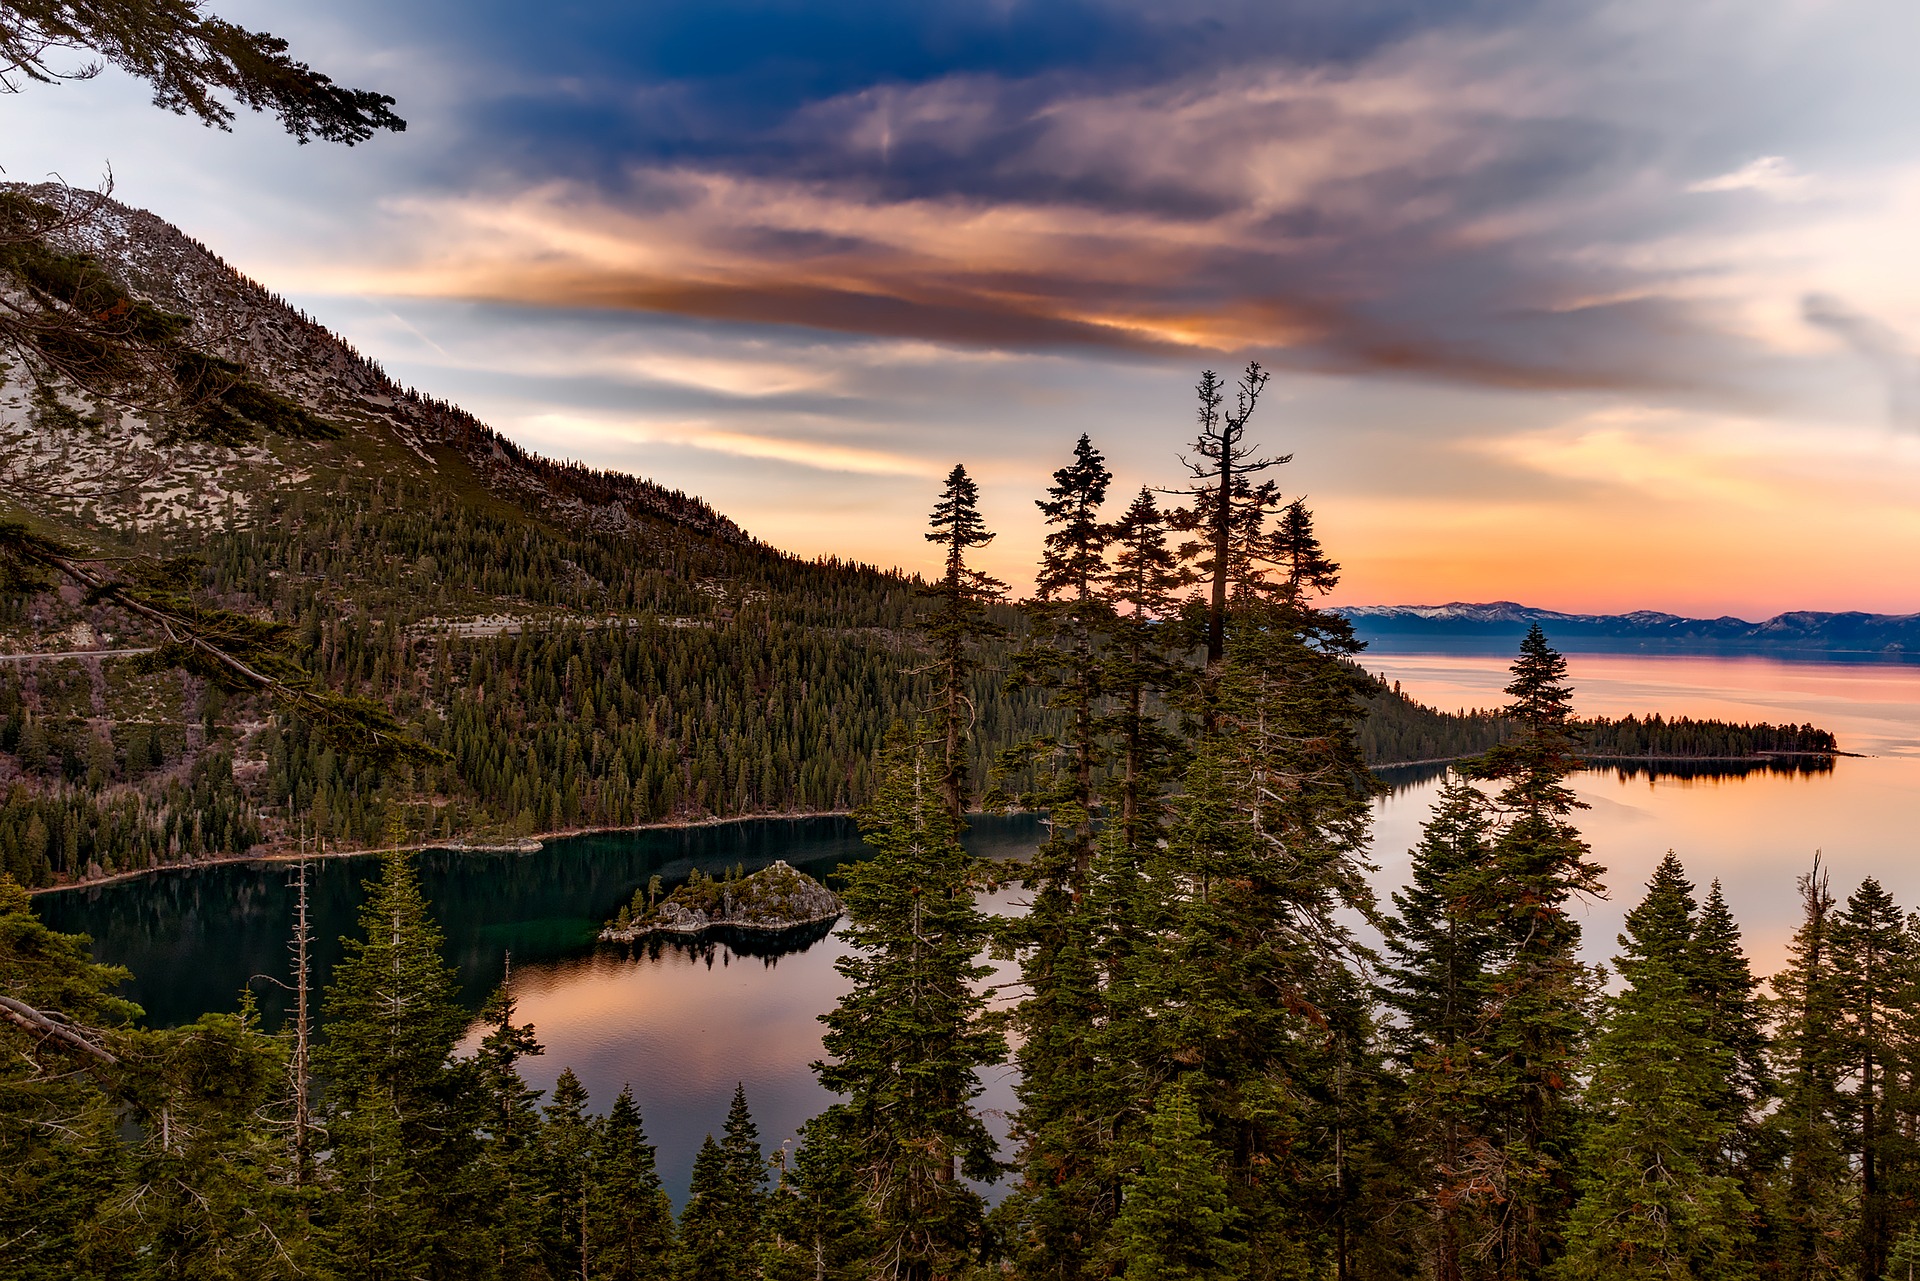 Lake Tahoe The Destination for a Perfect Trip